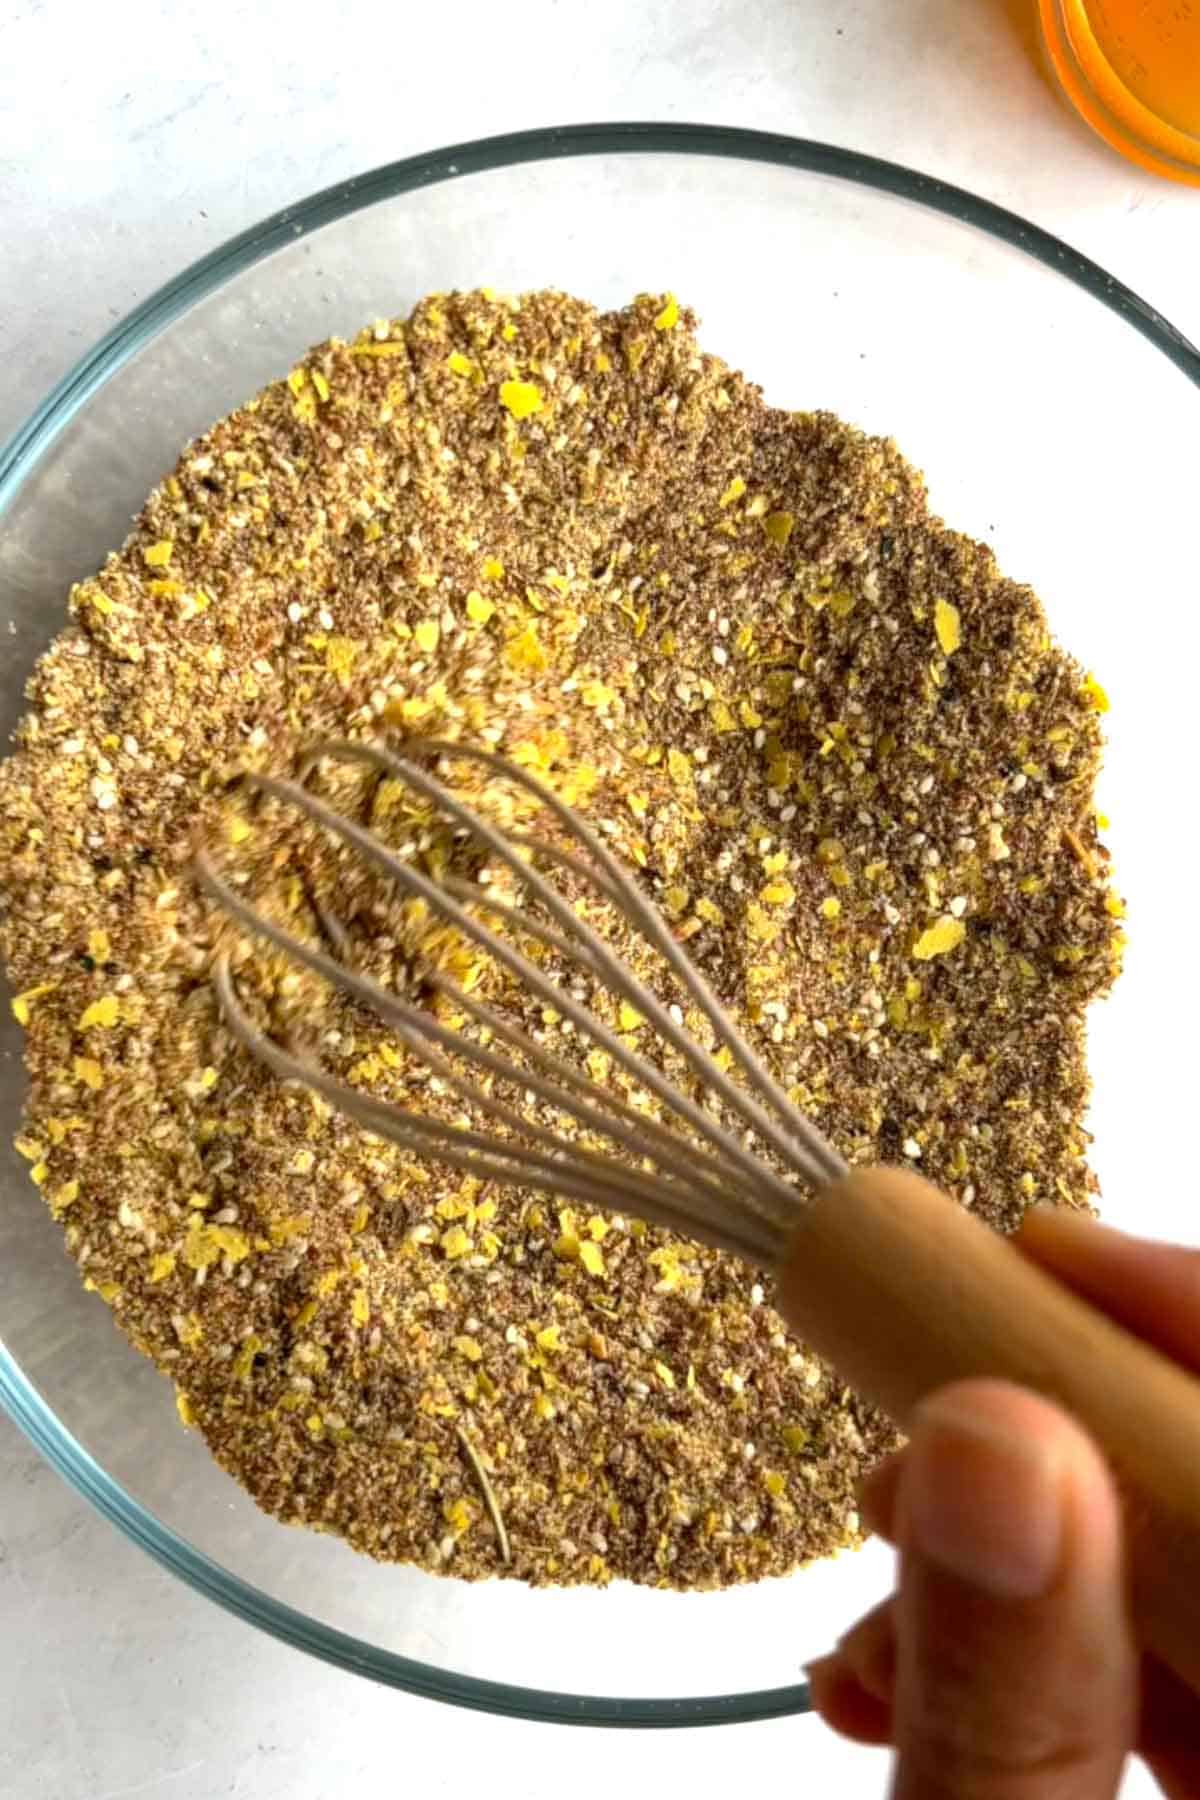 Nutritional yeast, ground flax seeds. sesame seeds and seasoning in a glass bowl with a grey silicone whisk.